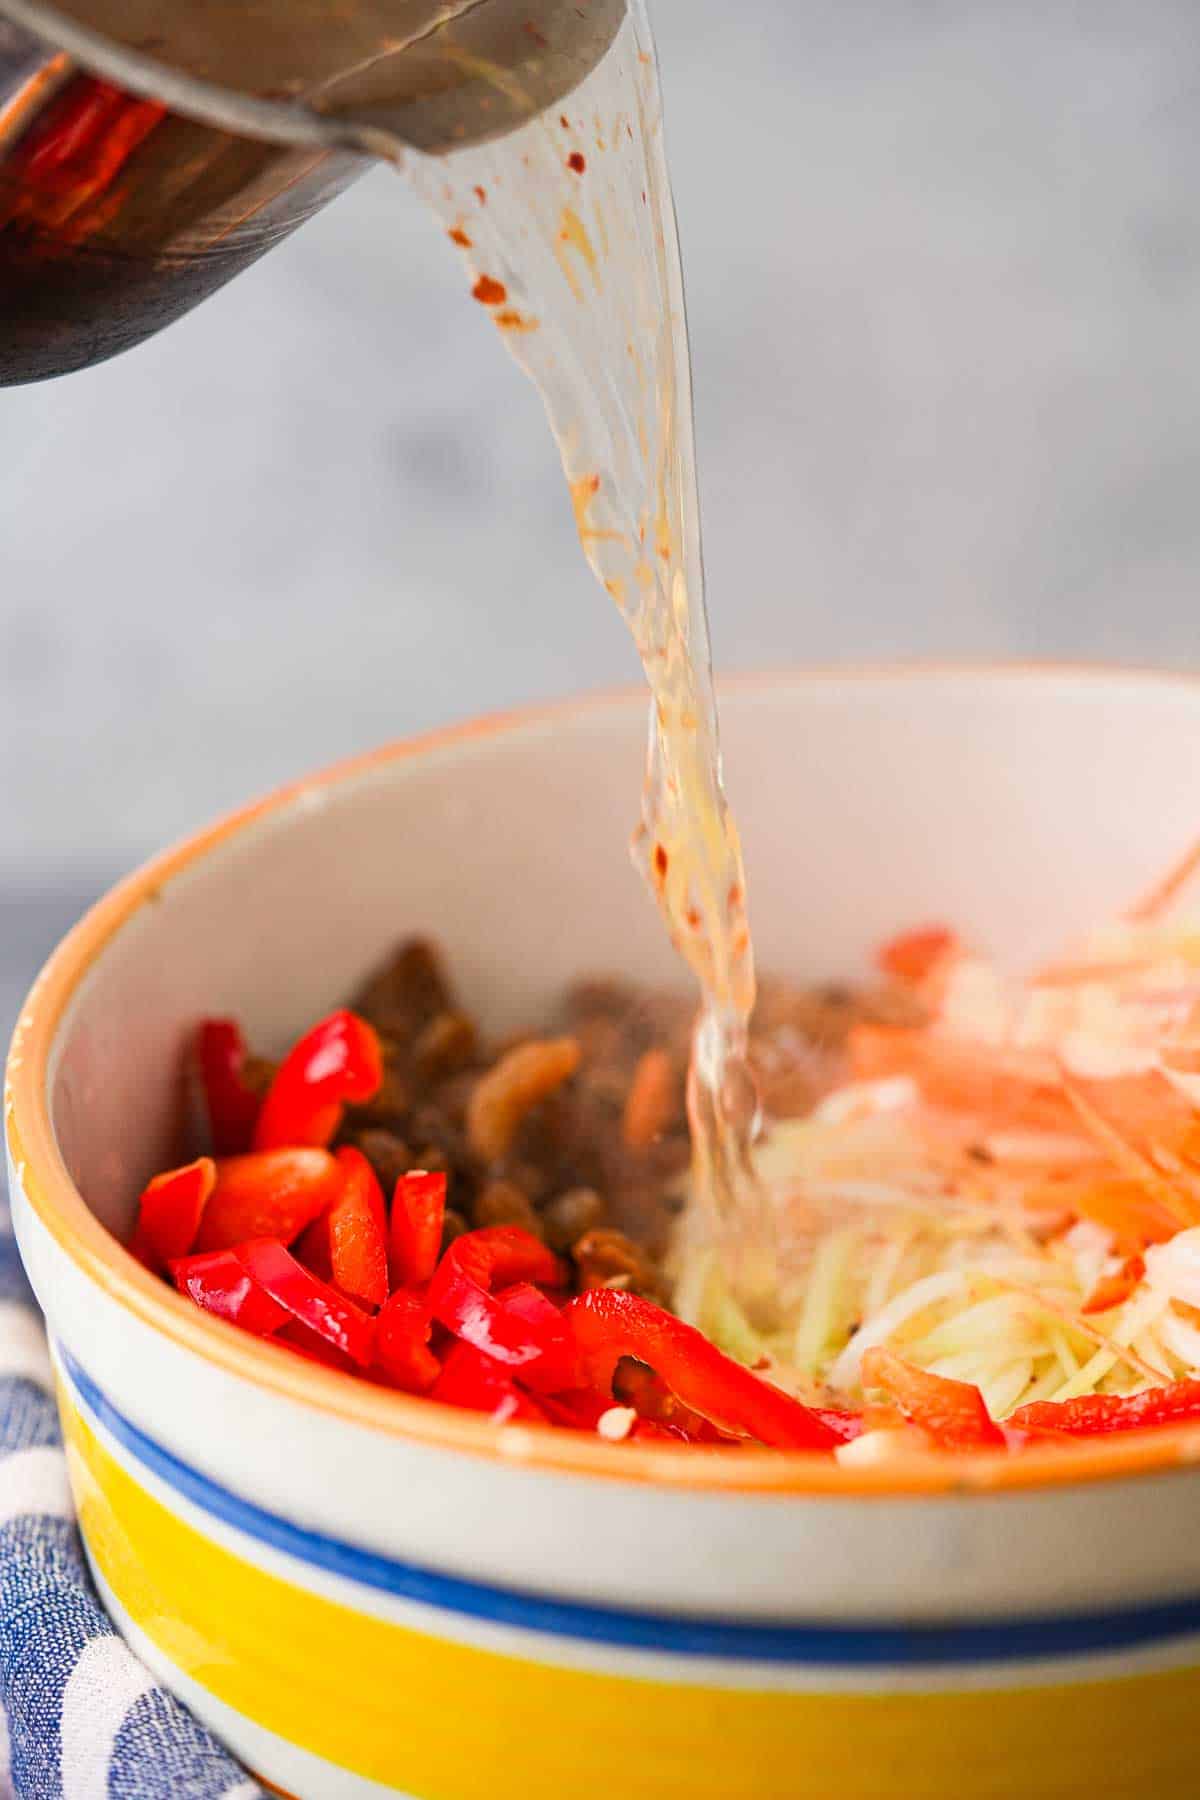 A pot of hot brine is poured into a bowl of prepped achara ingredients